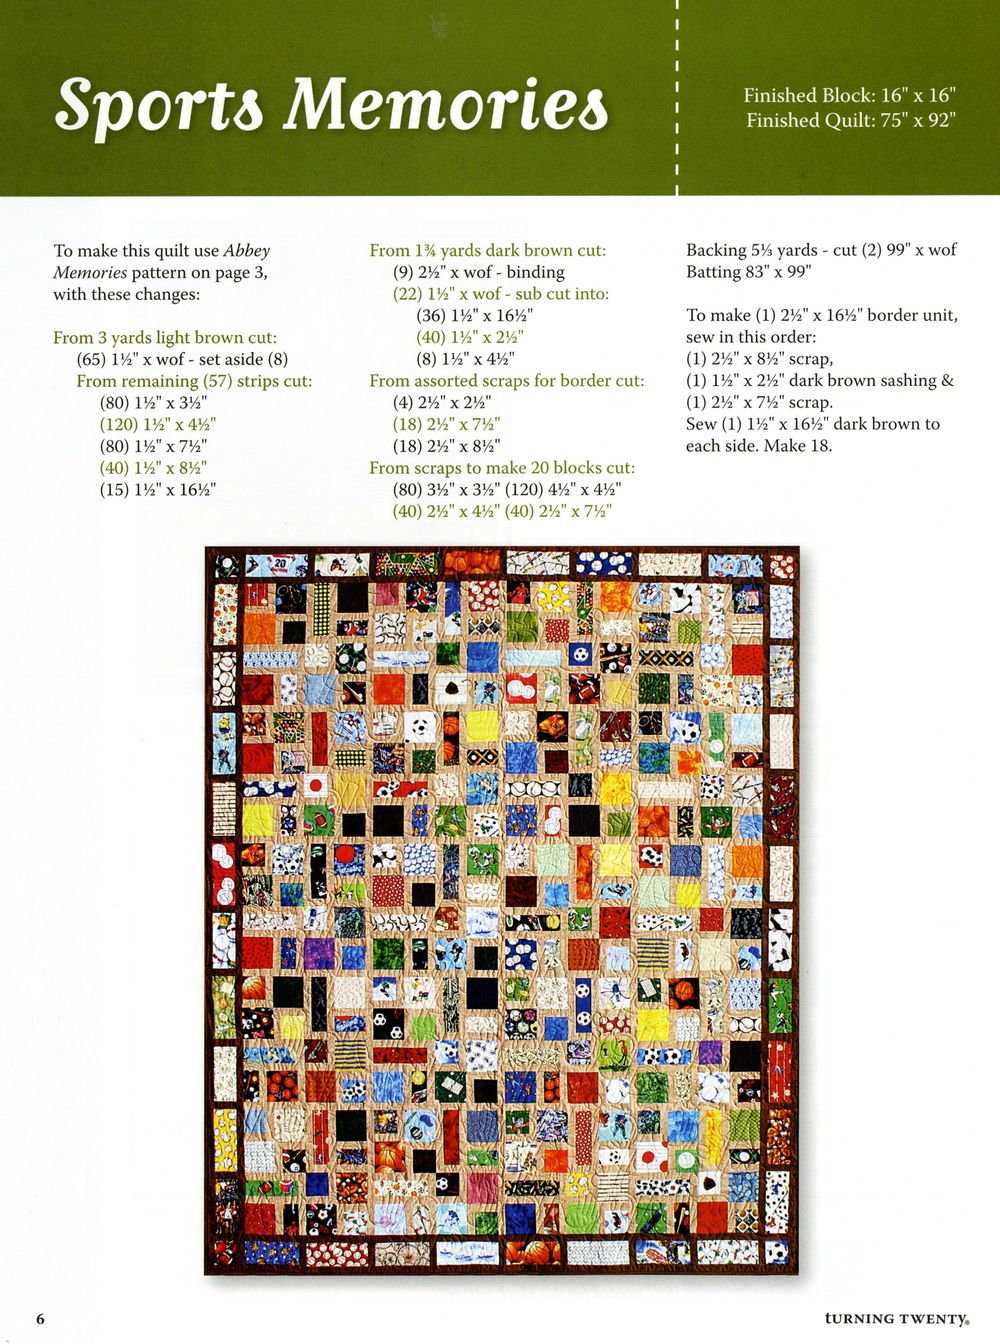 Turning Twenty Stained Glass And Scraps Quilt Pattern Book by Tricia Cribbs of Friendfolks